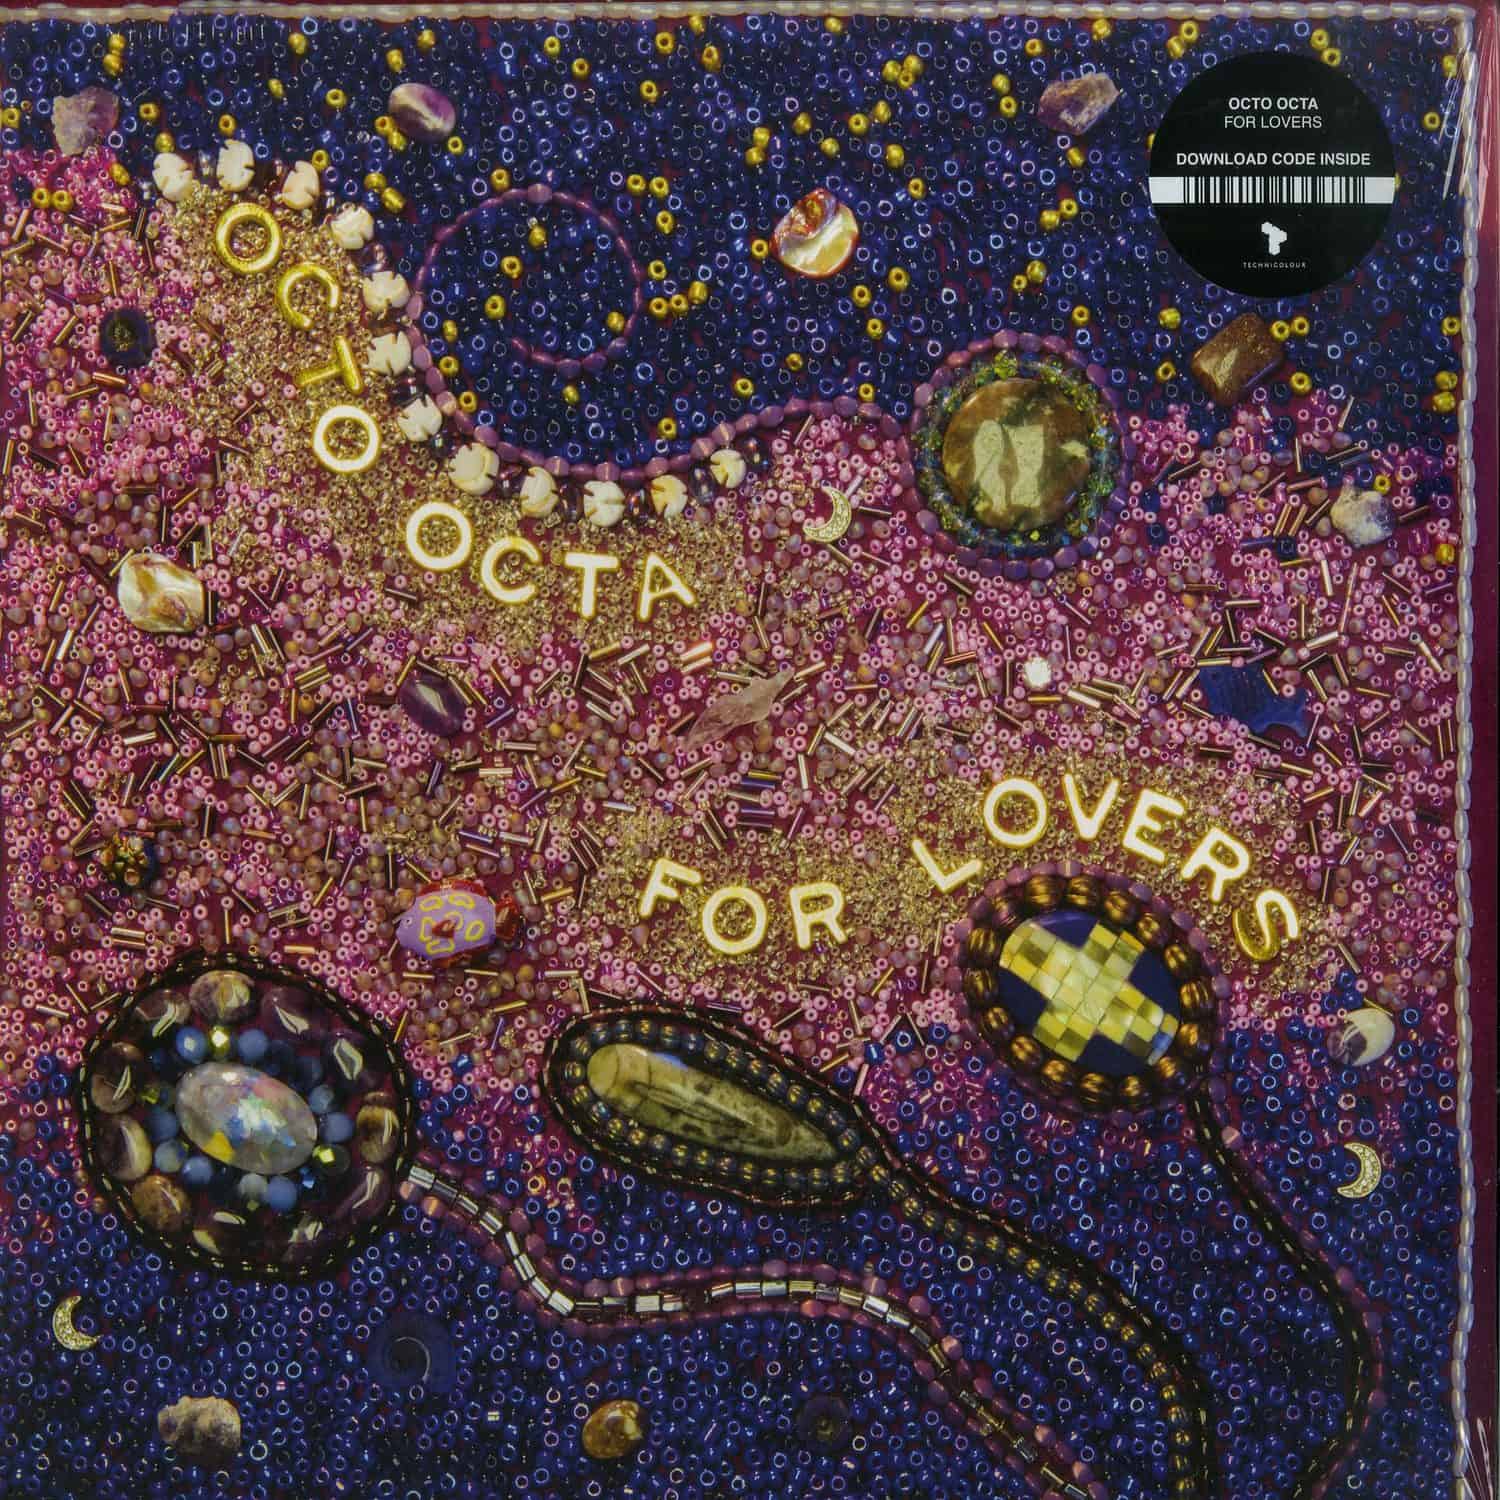 Octo Octa - FOR LOVERS